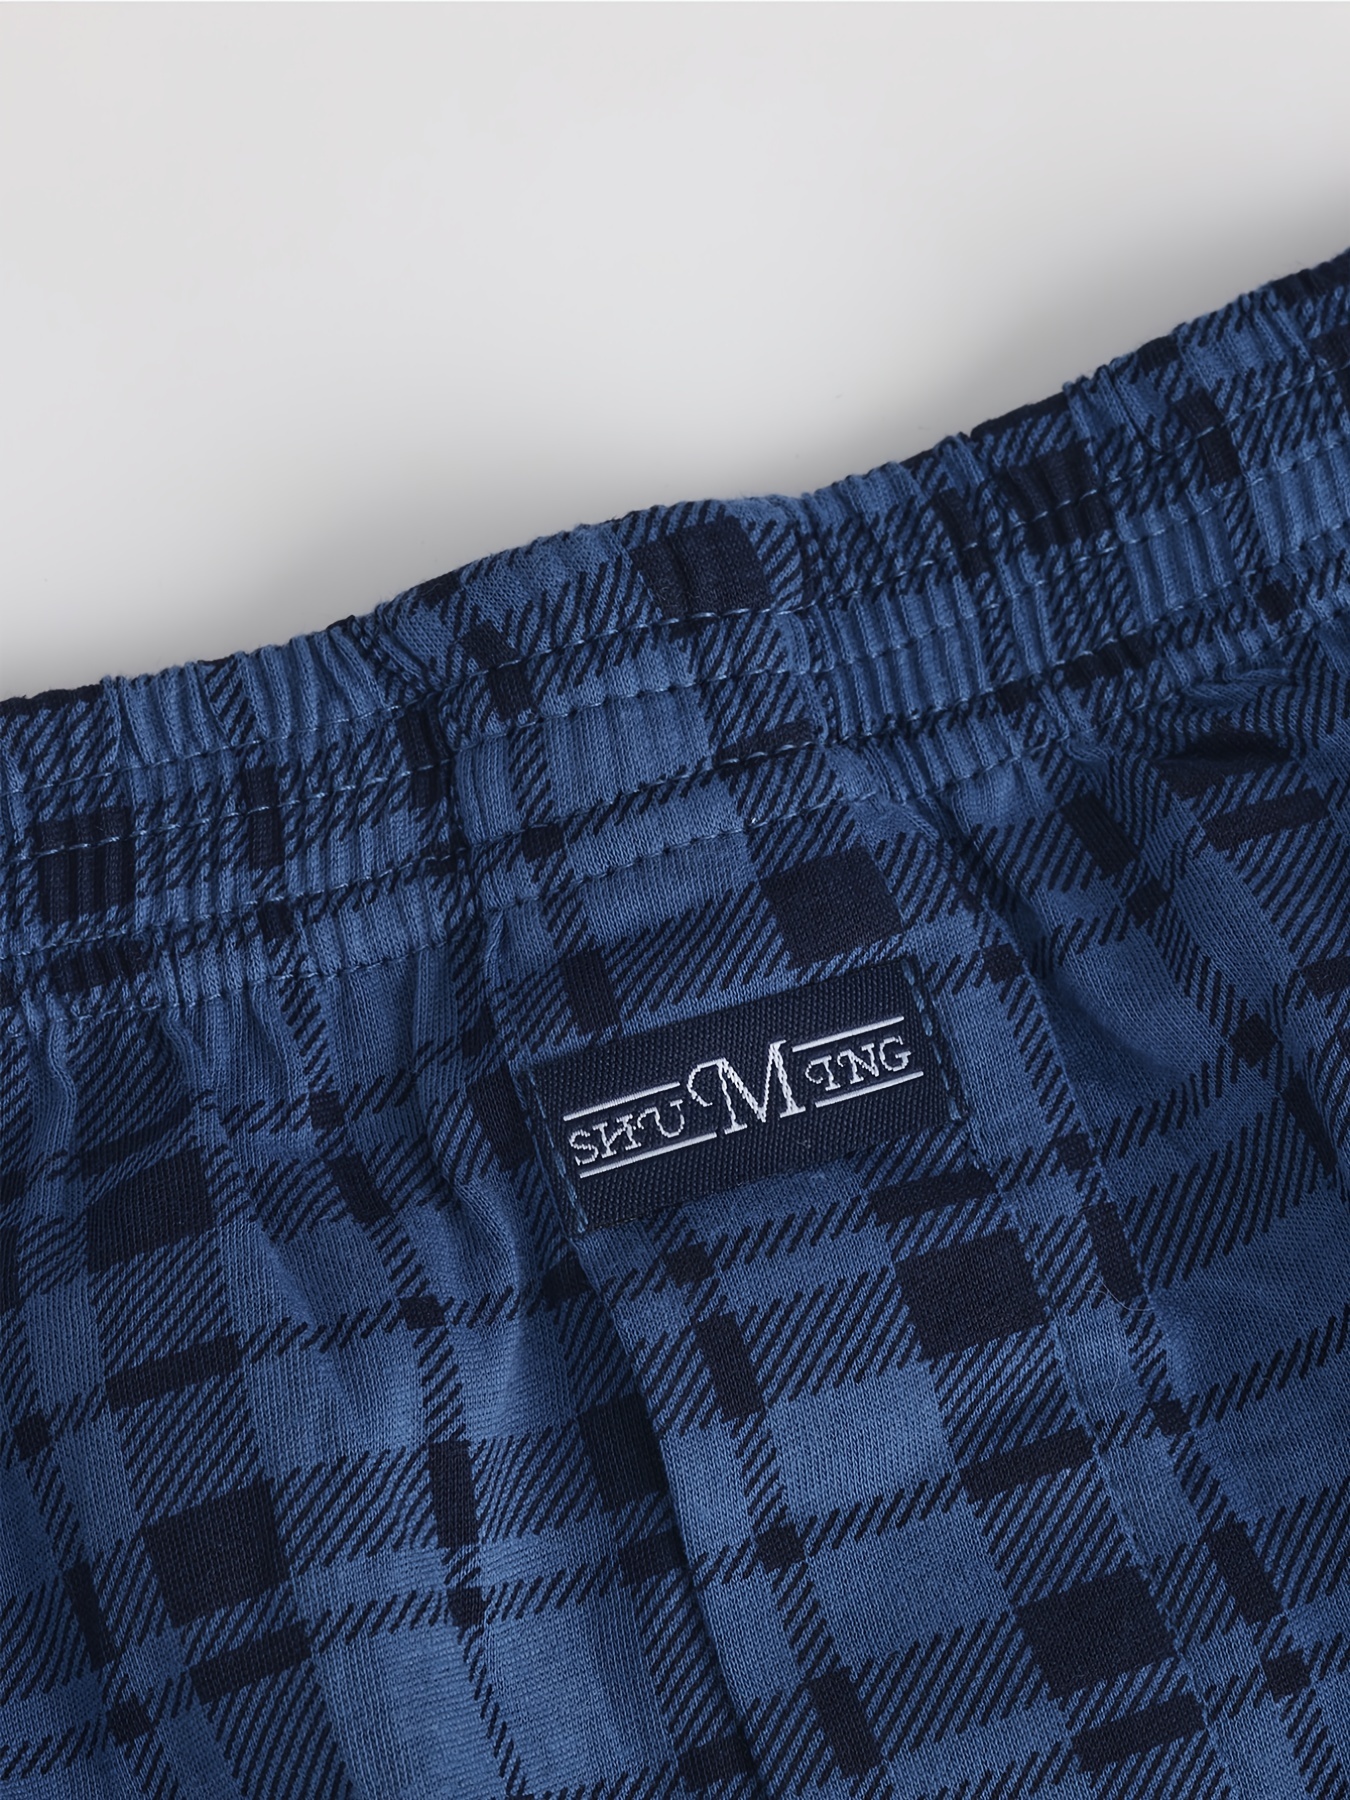 Mens Underwear, Dark Light, Blue Plaid, Blue Simple Free PNG And